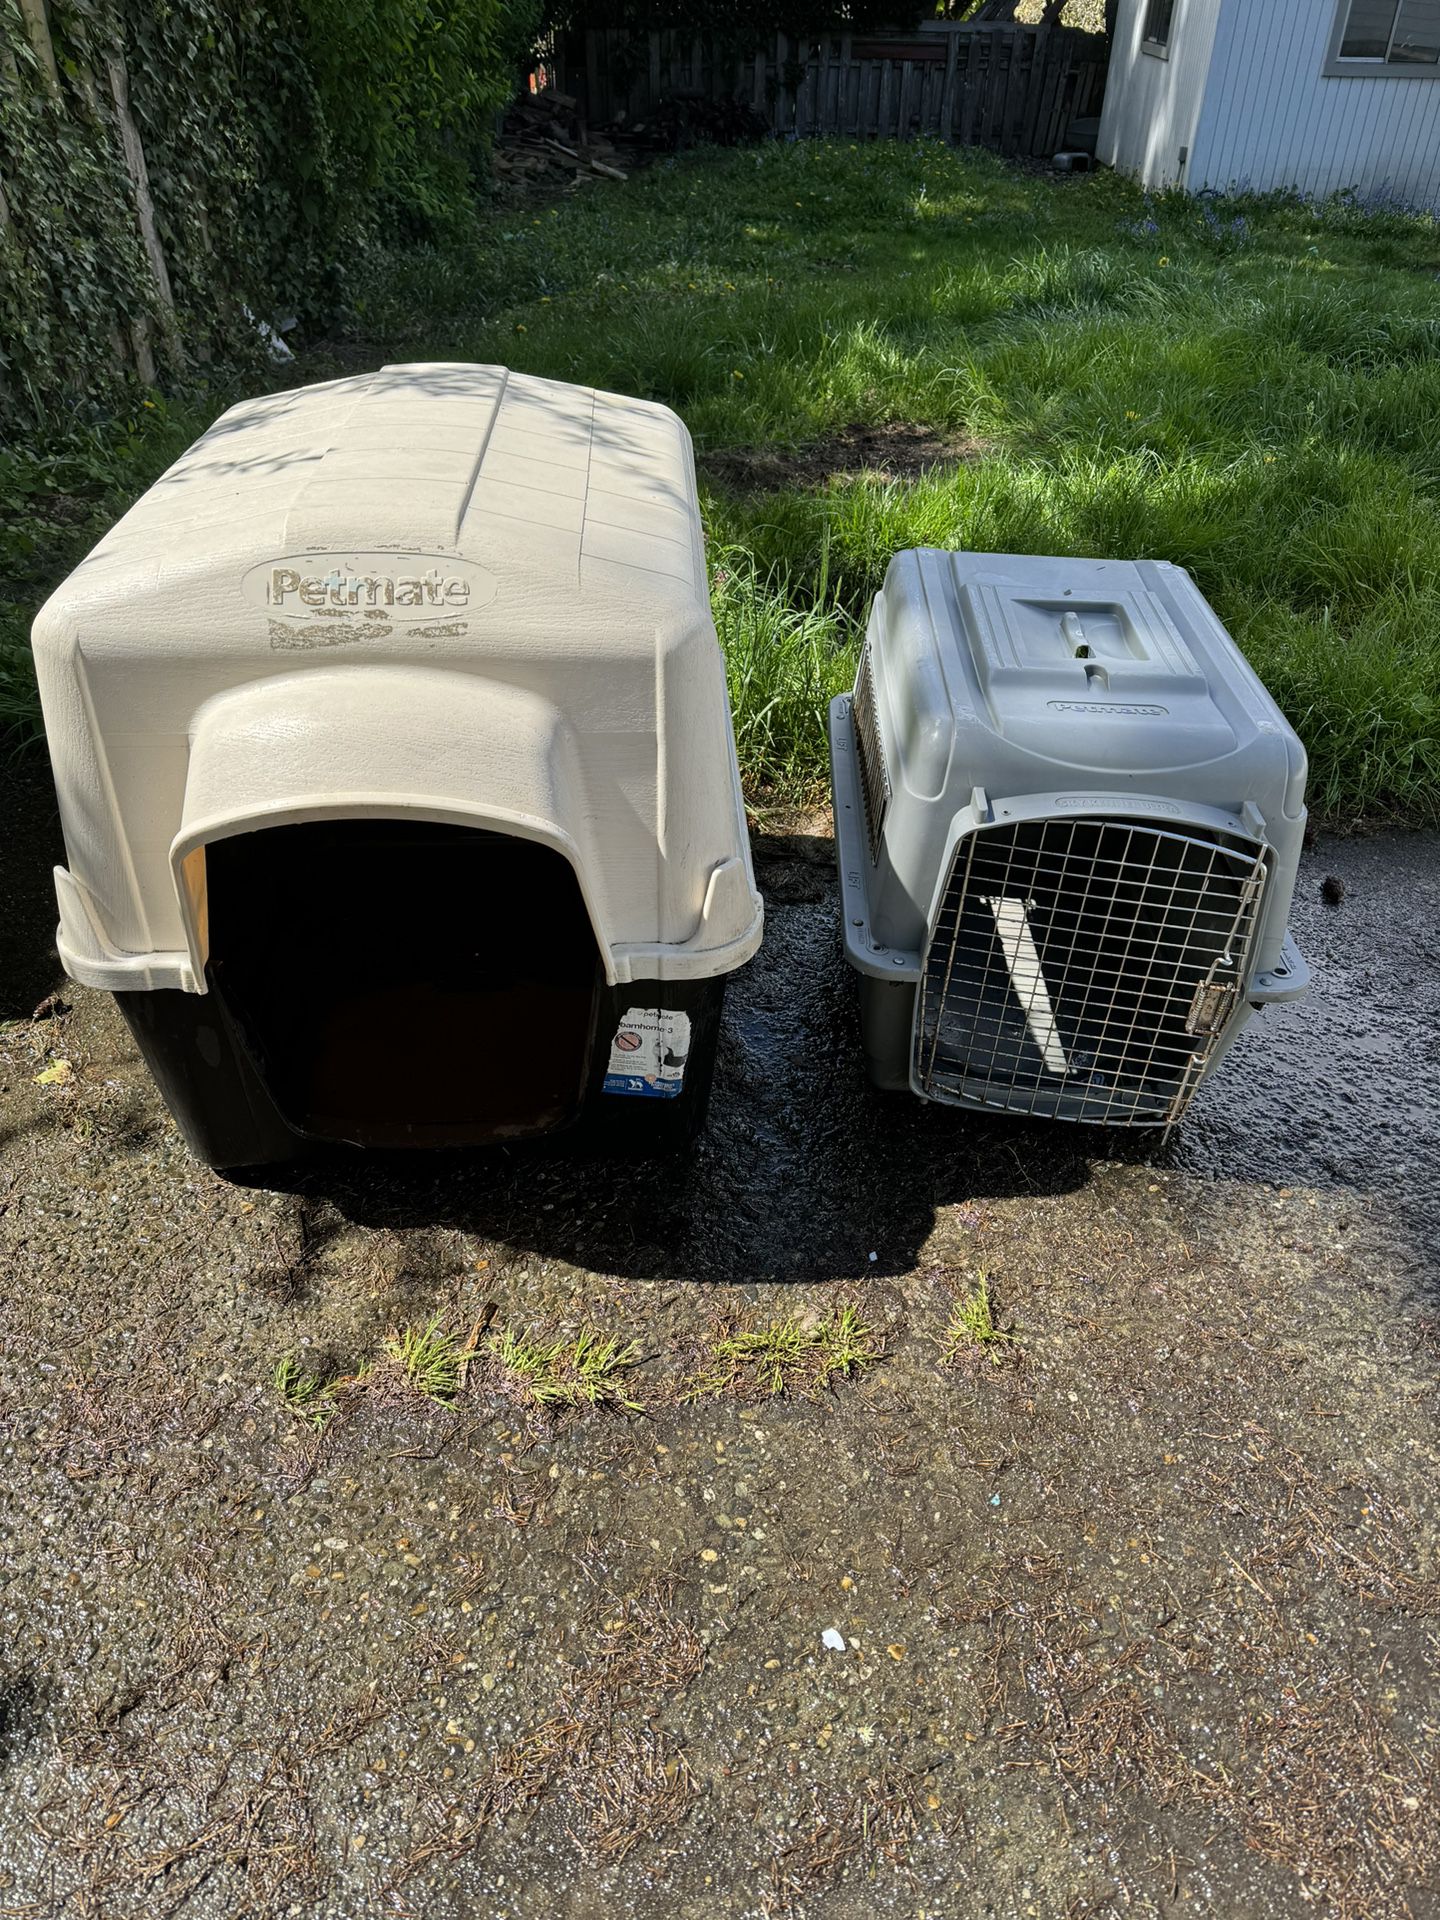 Petmate Dog House And Cat Carrier